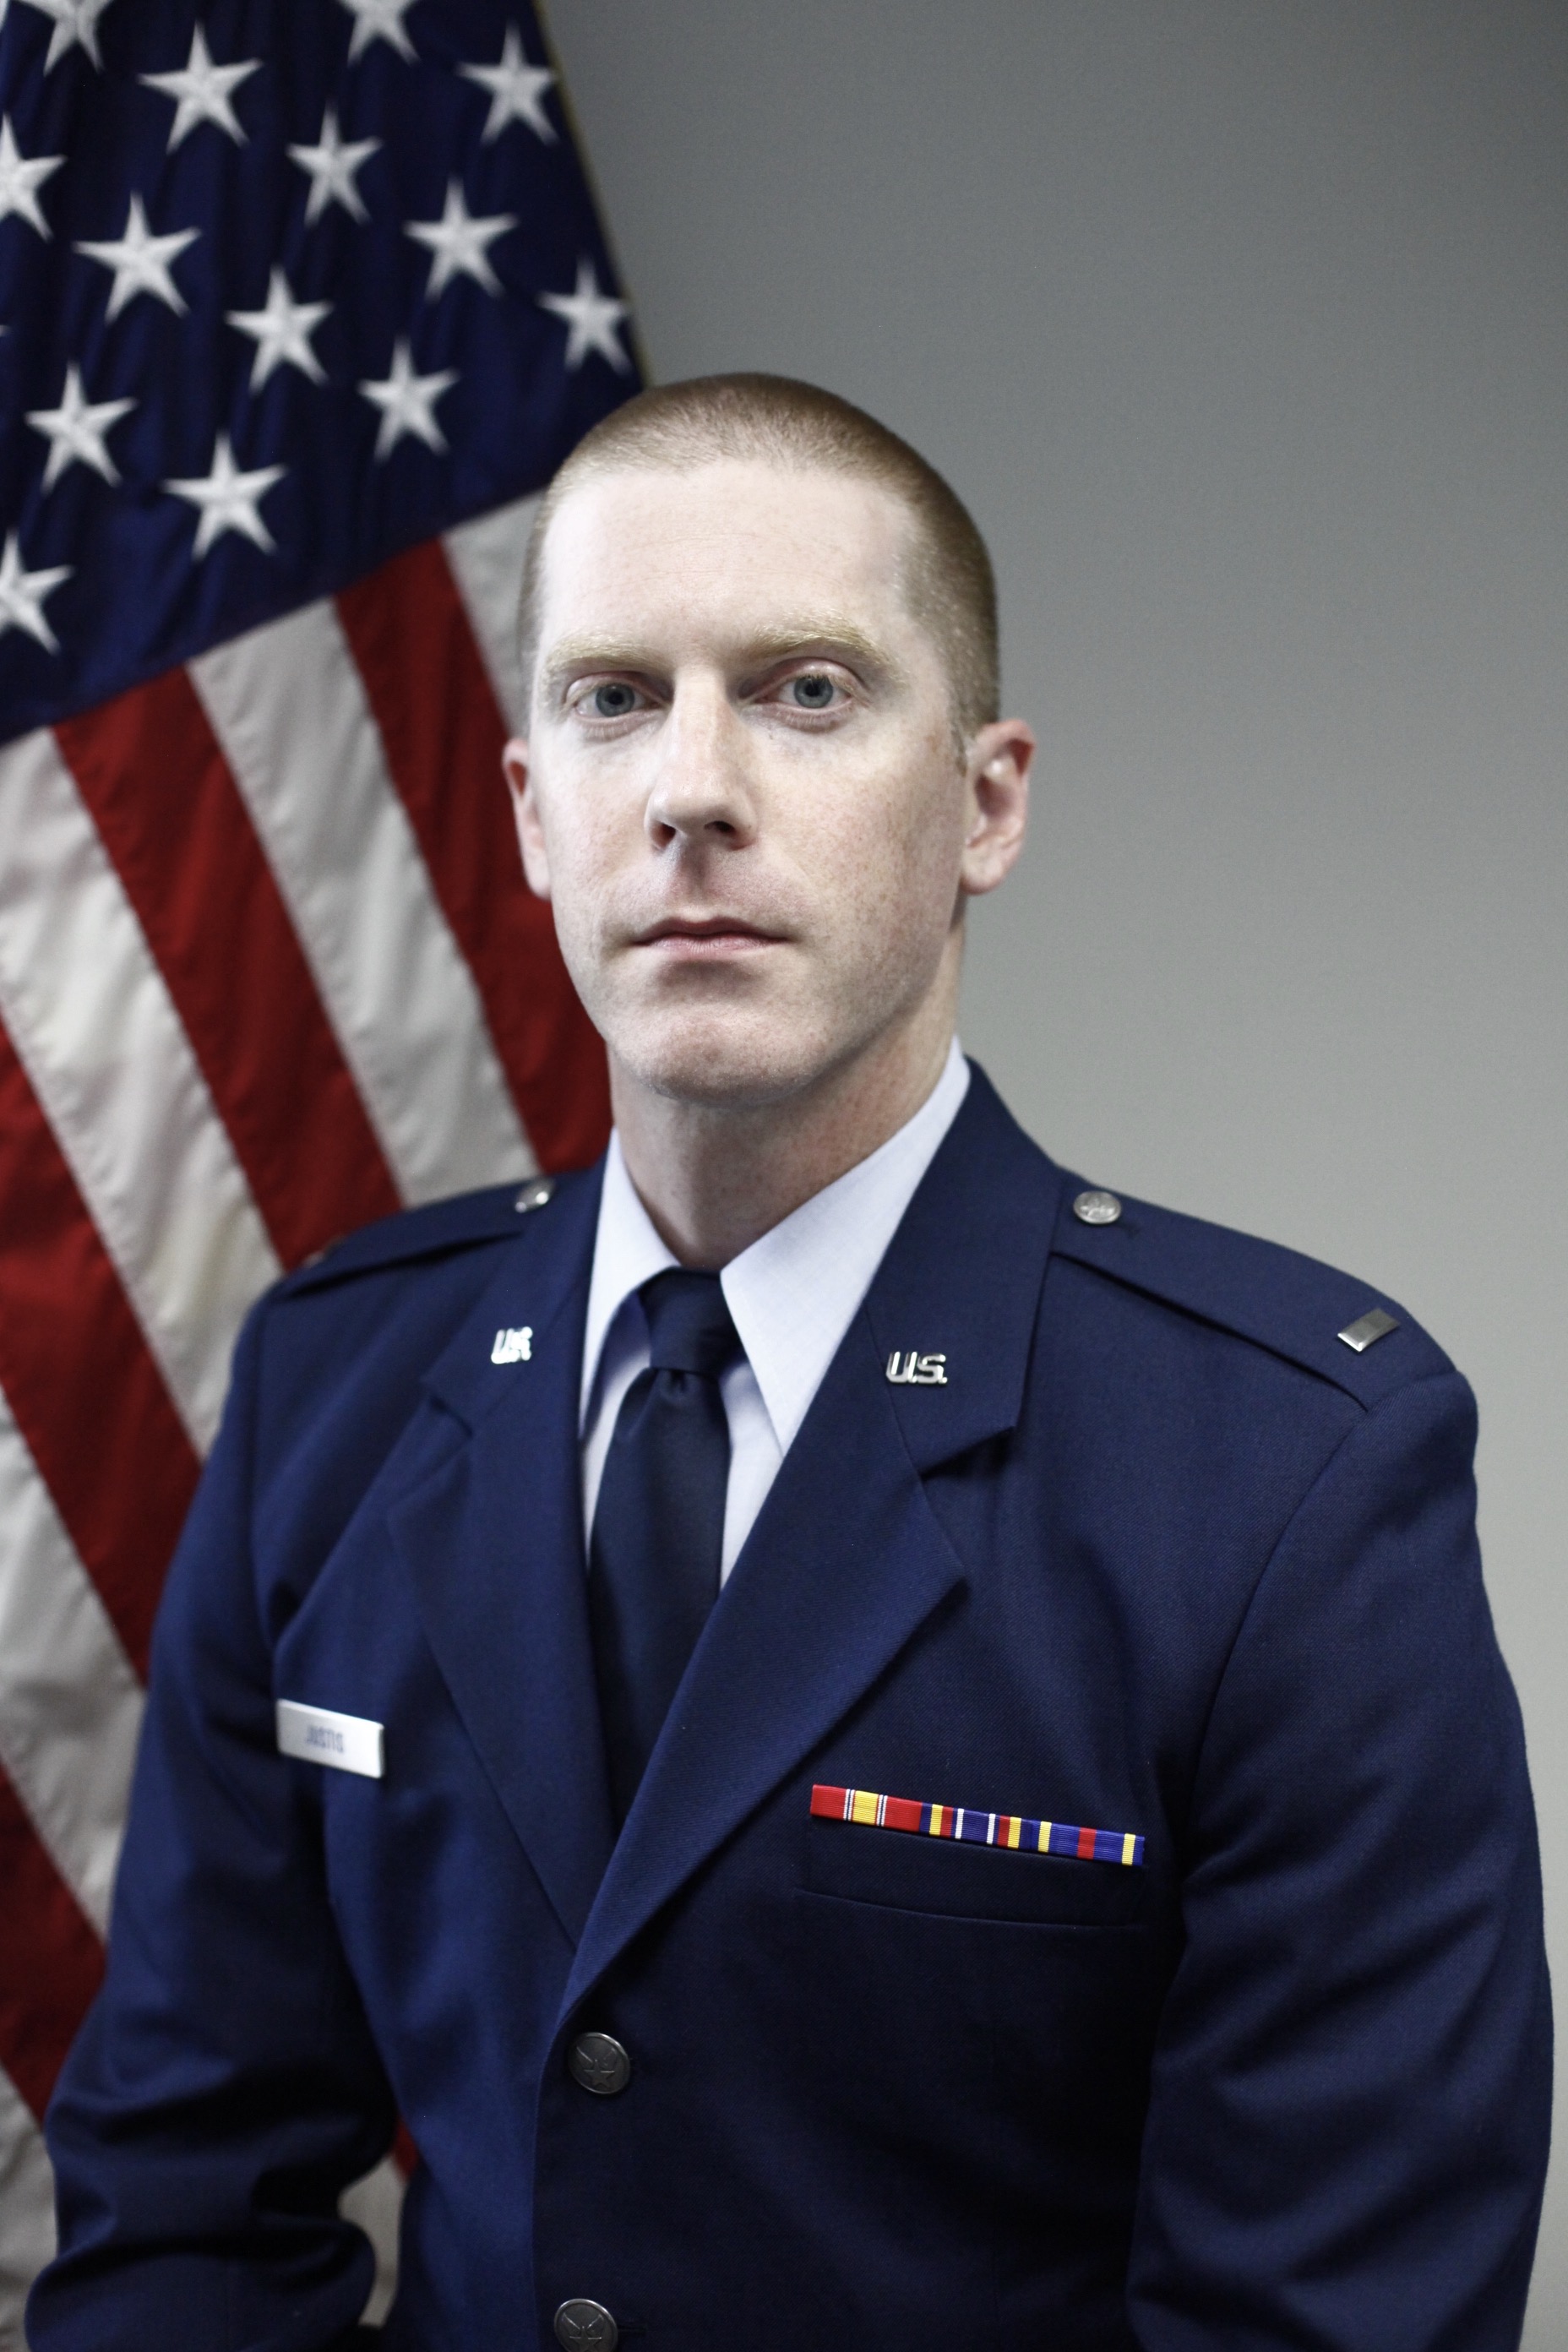 Gregory Justis ('14) appointed to JAG role for U.S. Air Force